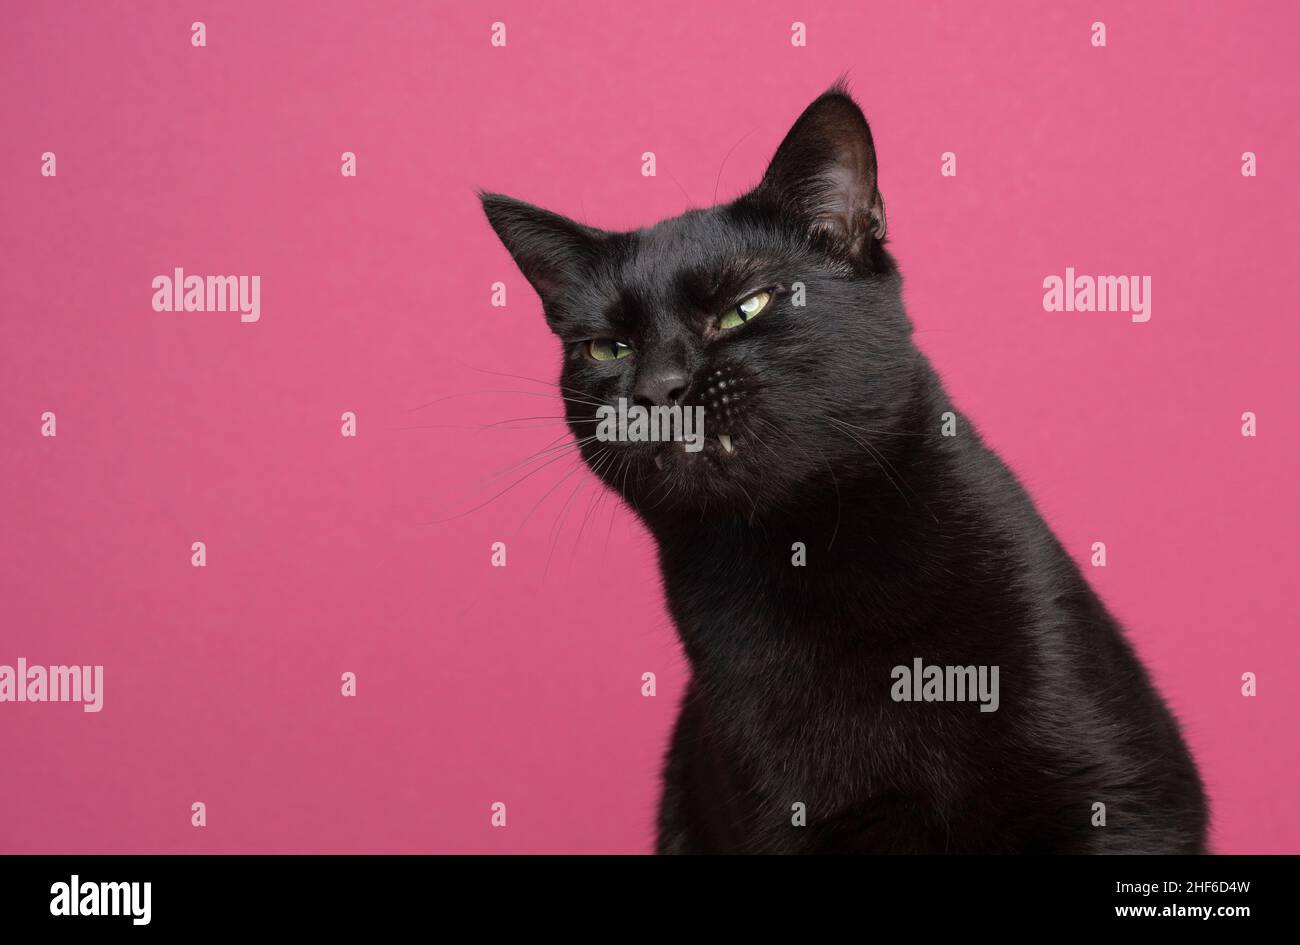 funny black cat making angry face showing teeth on pink background Stock Photo